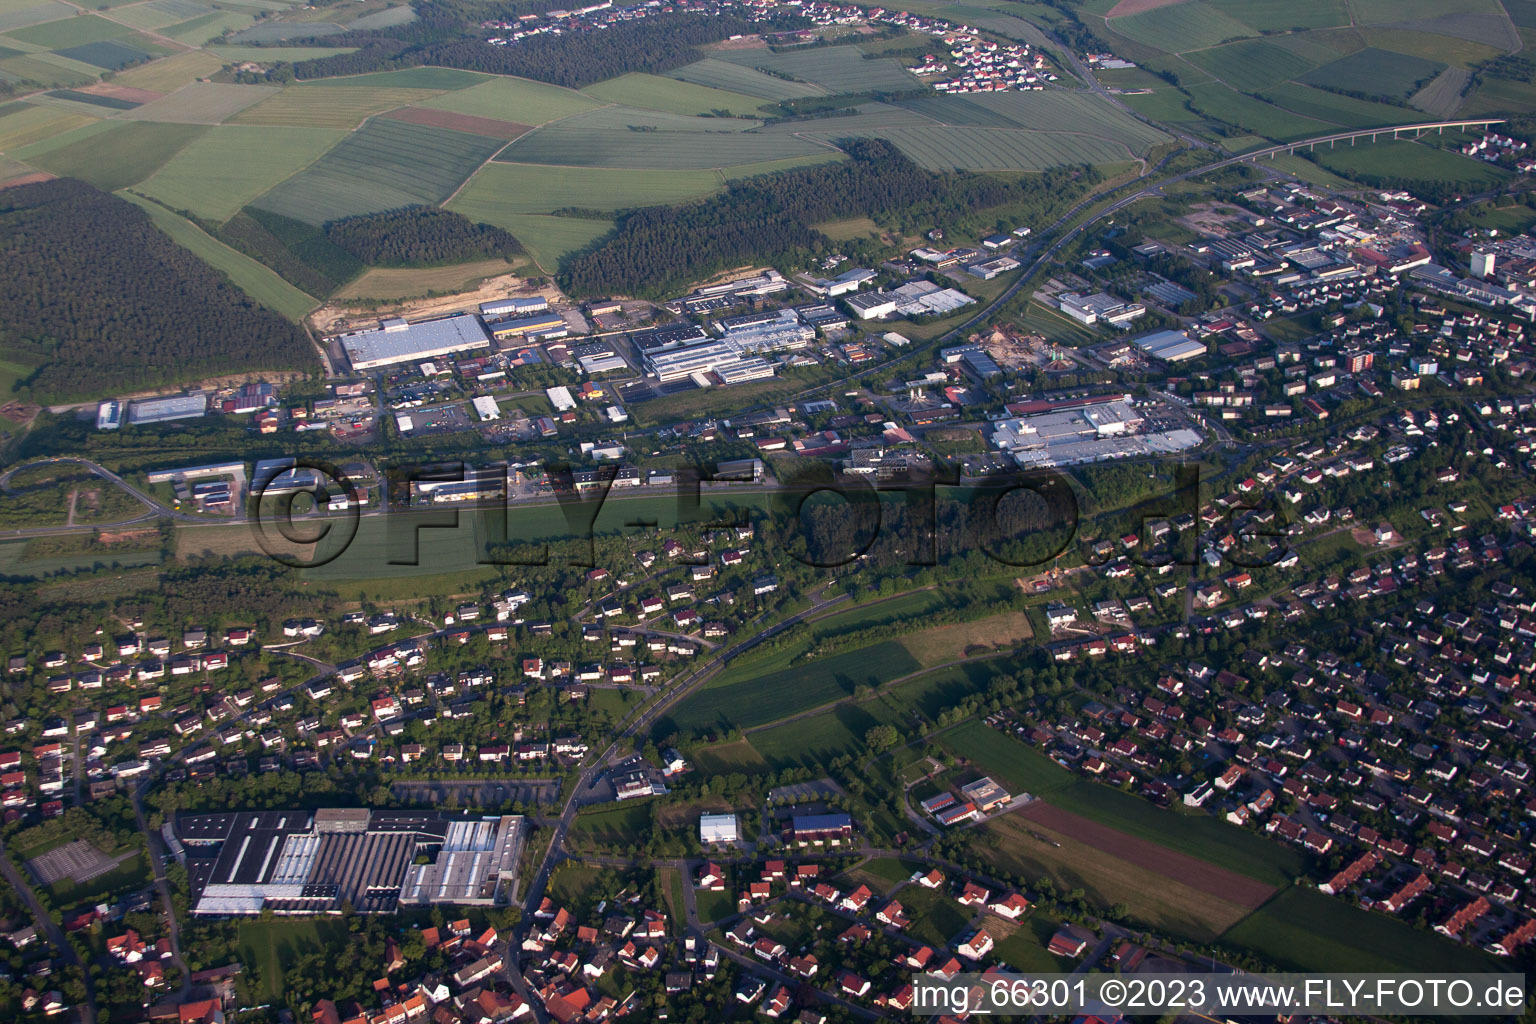 Hainstadt in the state Baden-Wuerttemberg, Germany seen from above